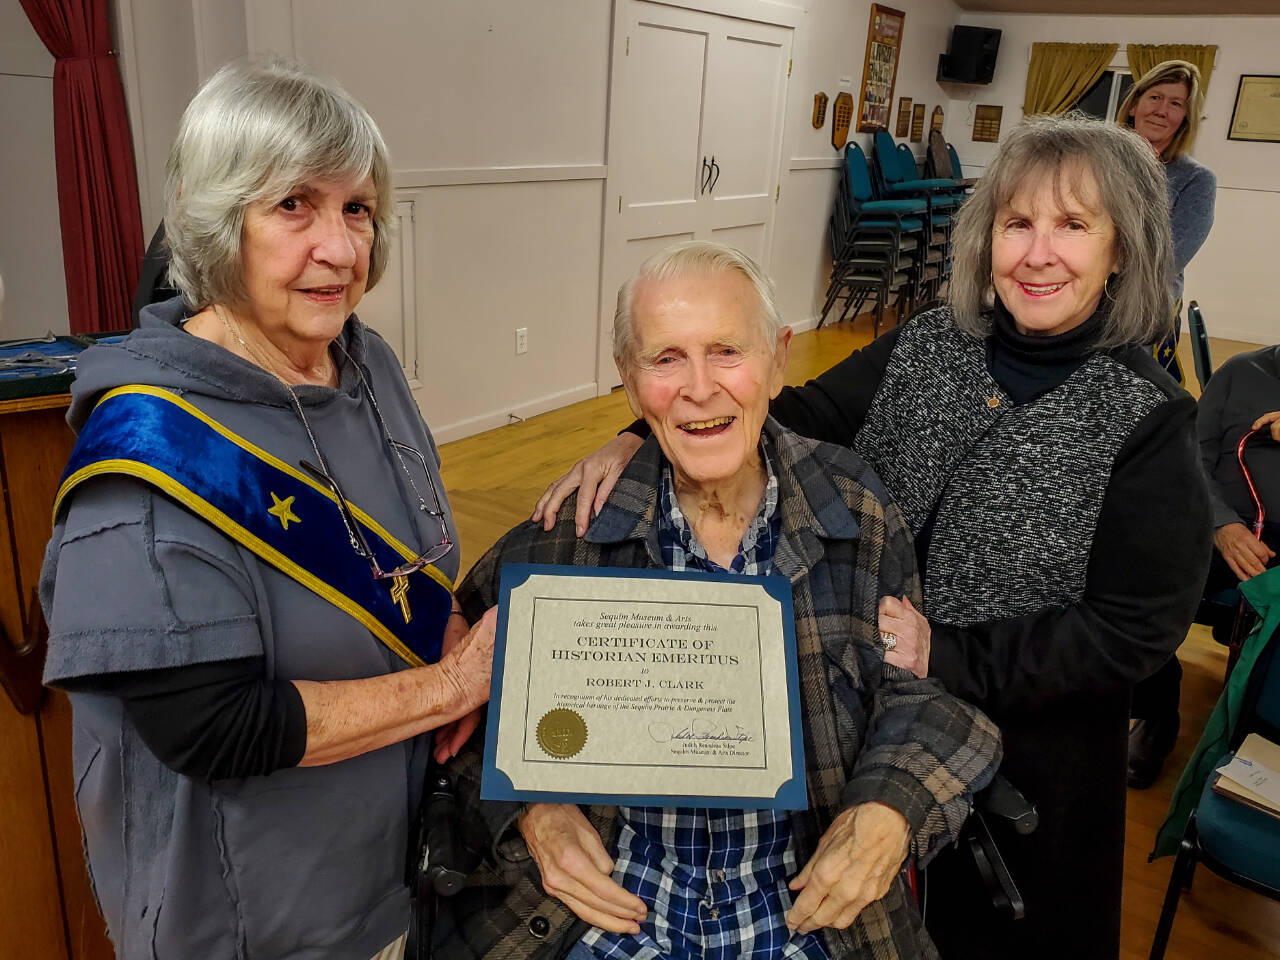 Submitted photo
Robert Clark receives the Sequim Museum & Art’s first Certificate of Historian Emeritus from Sequim Prairie Grange member Hazel Ault, left, and Judy Reandeau Stipe, Sequim Museum & Arts volunteer director, on Feb. 8. See story, A-12.